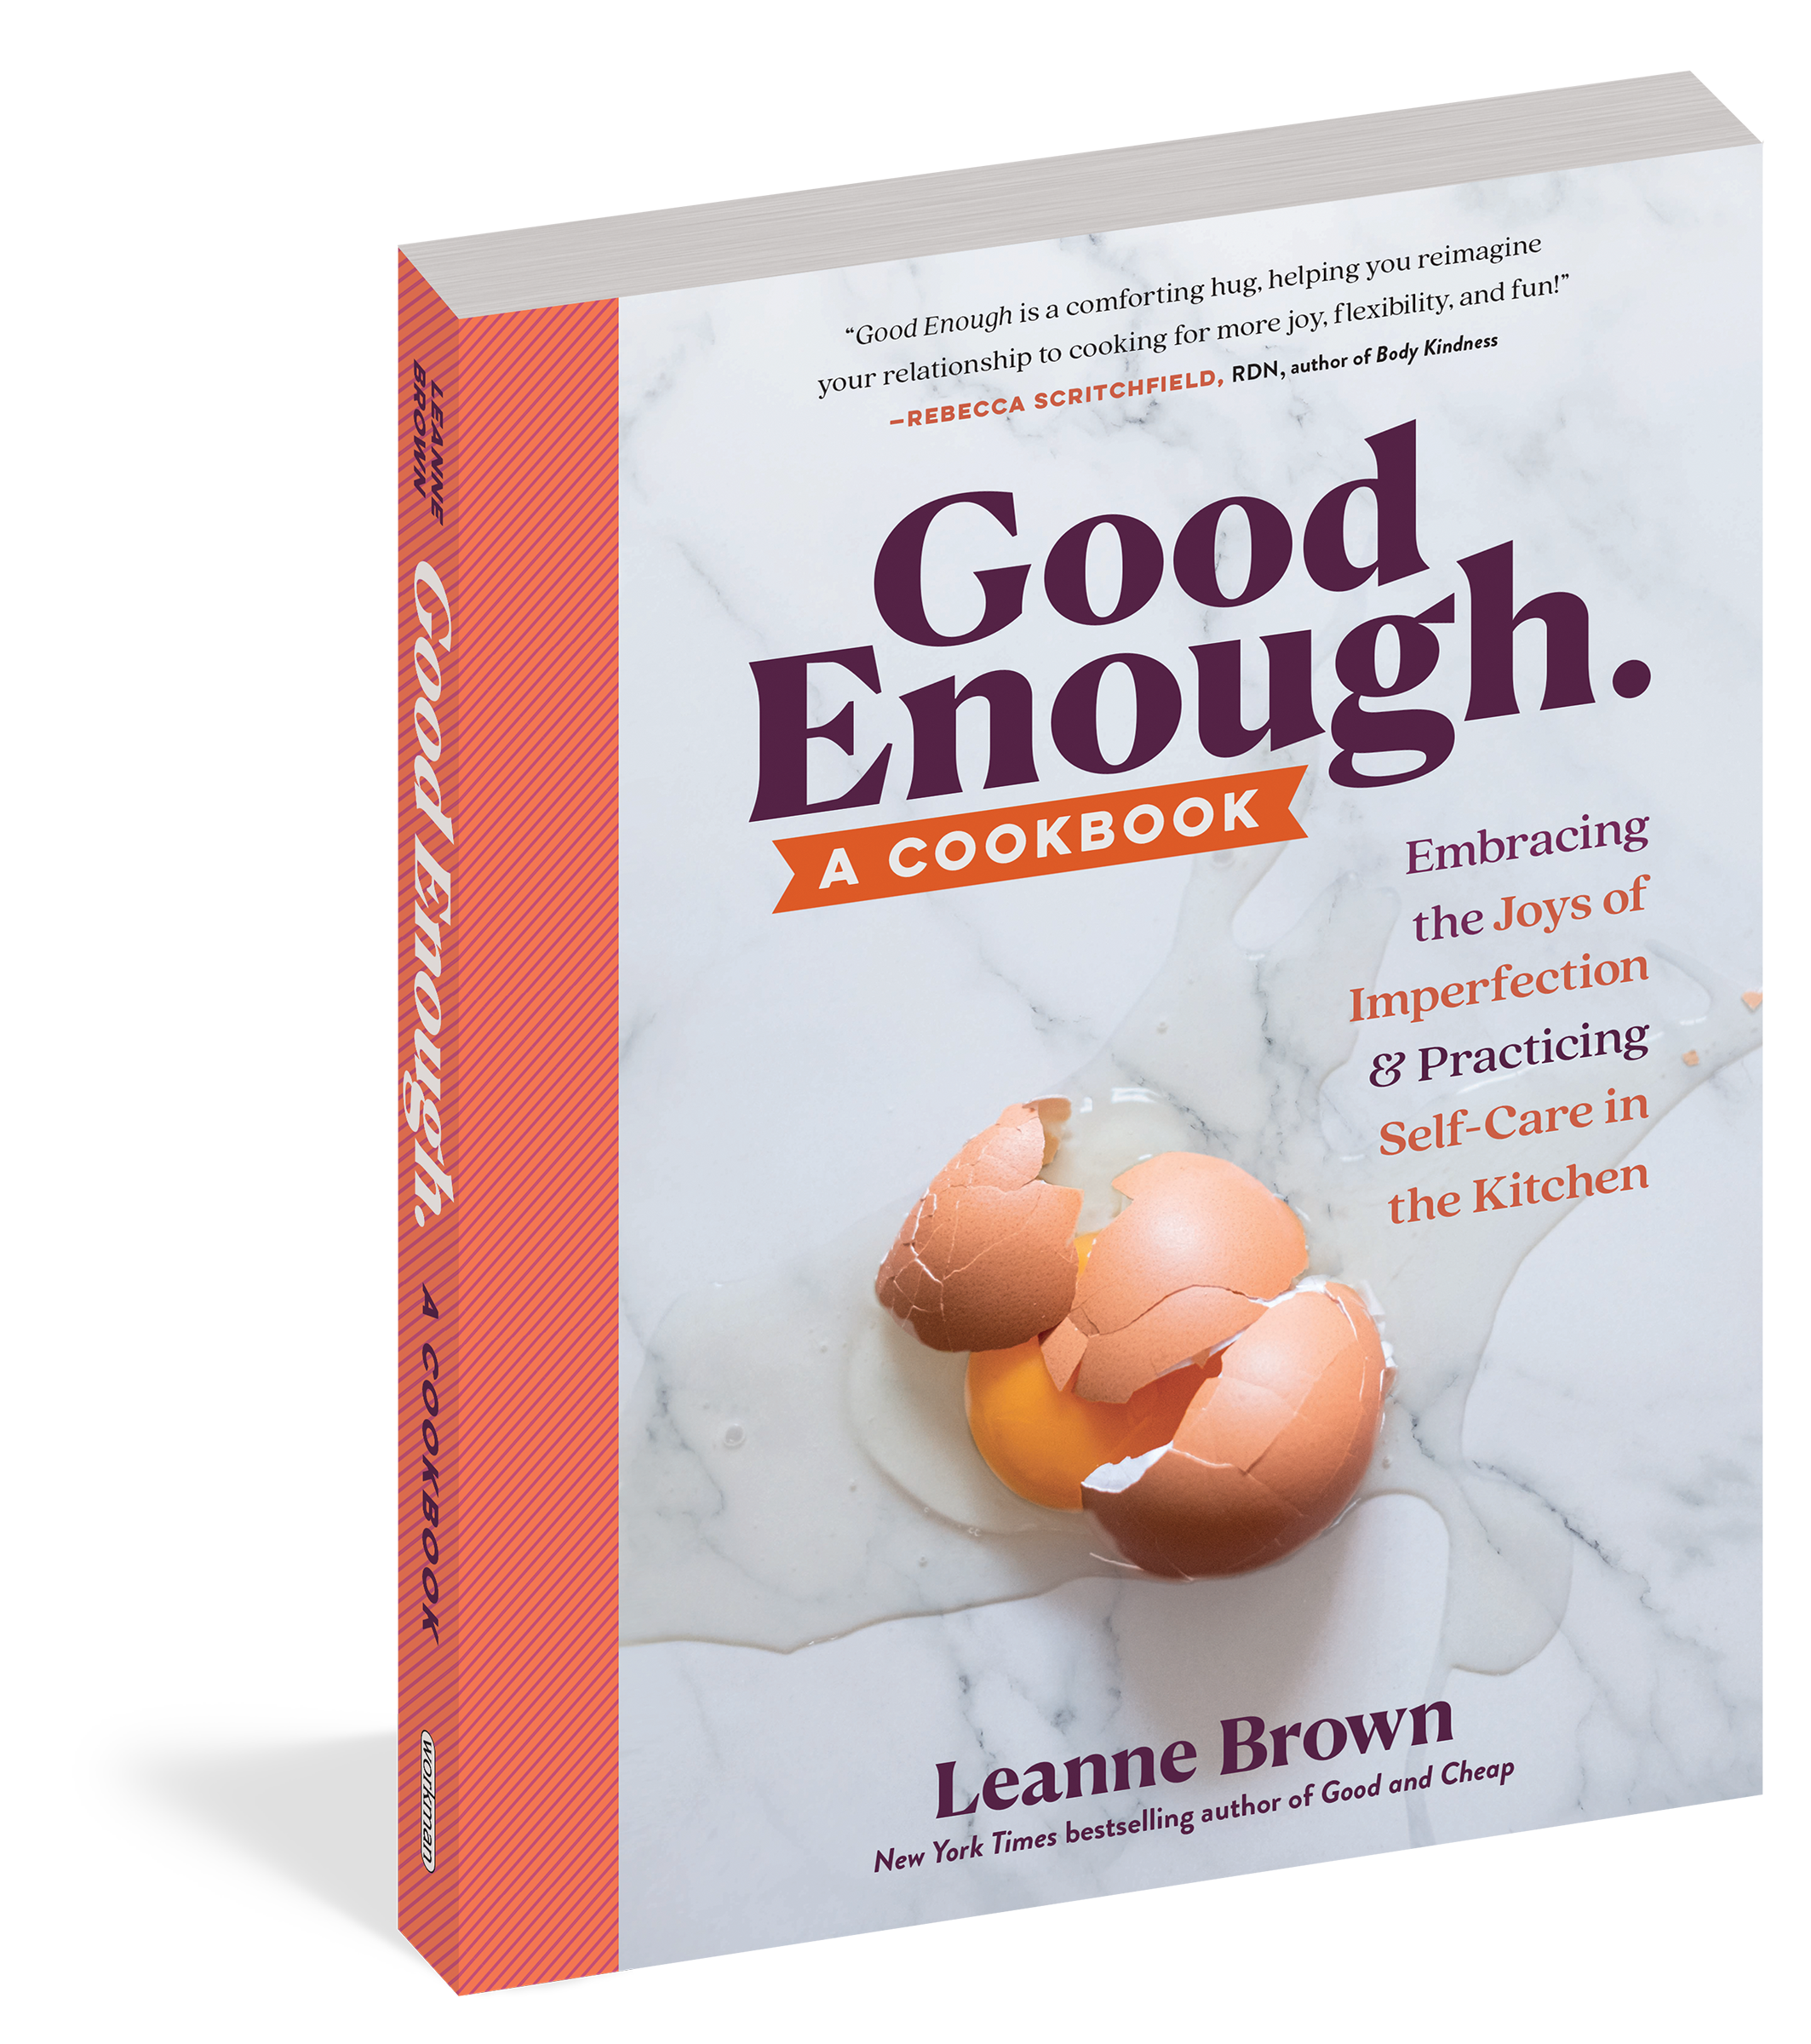 The cover of Good Enough by Leanne Brown